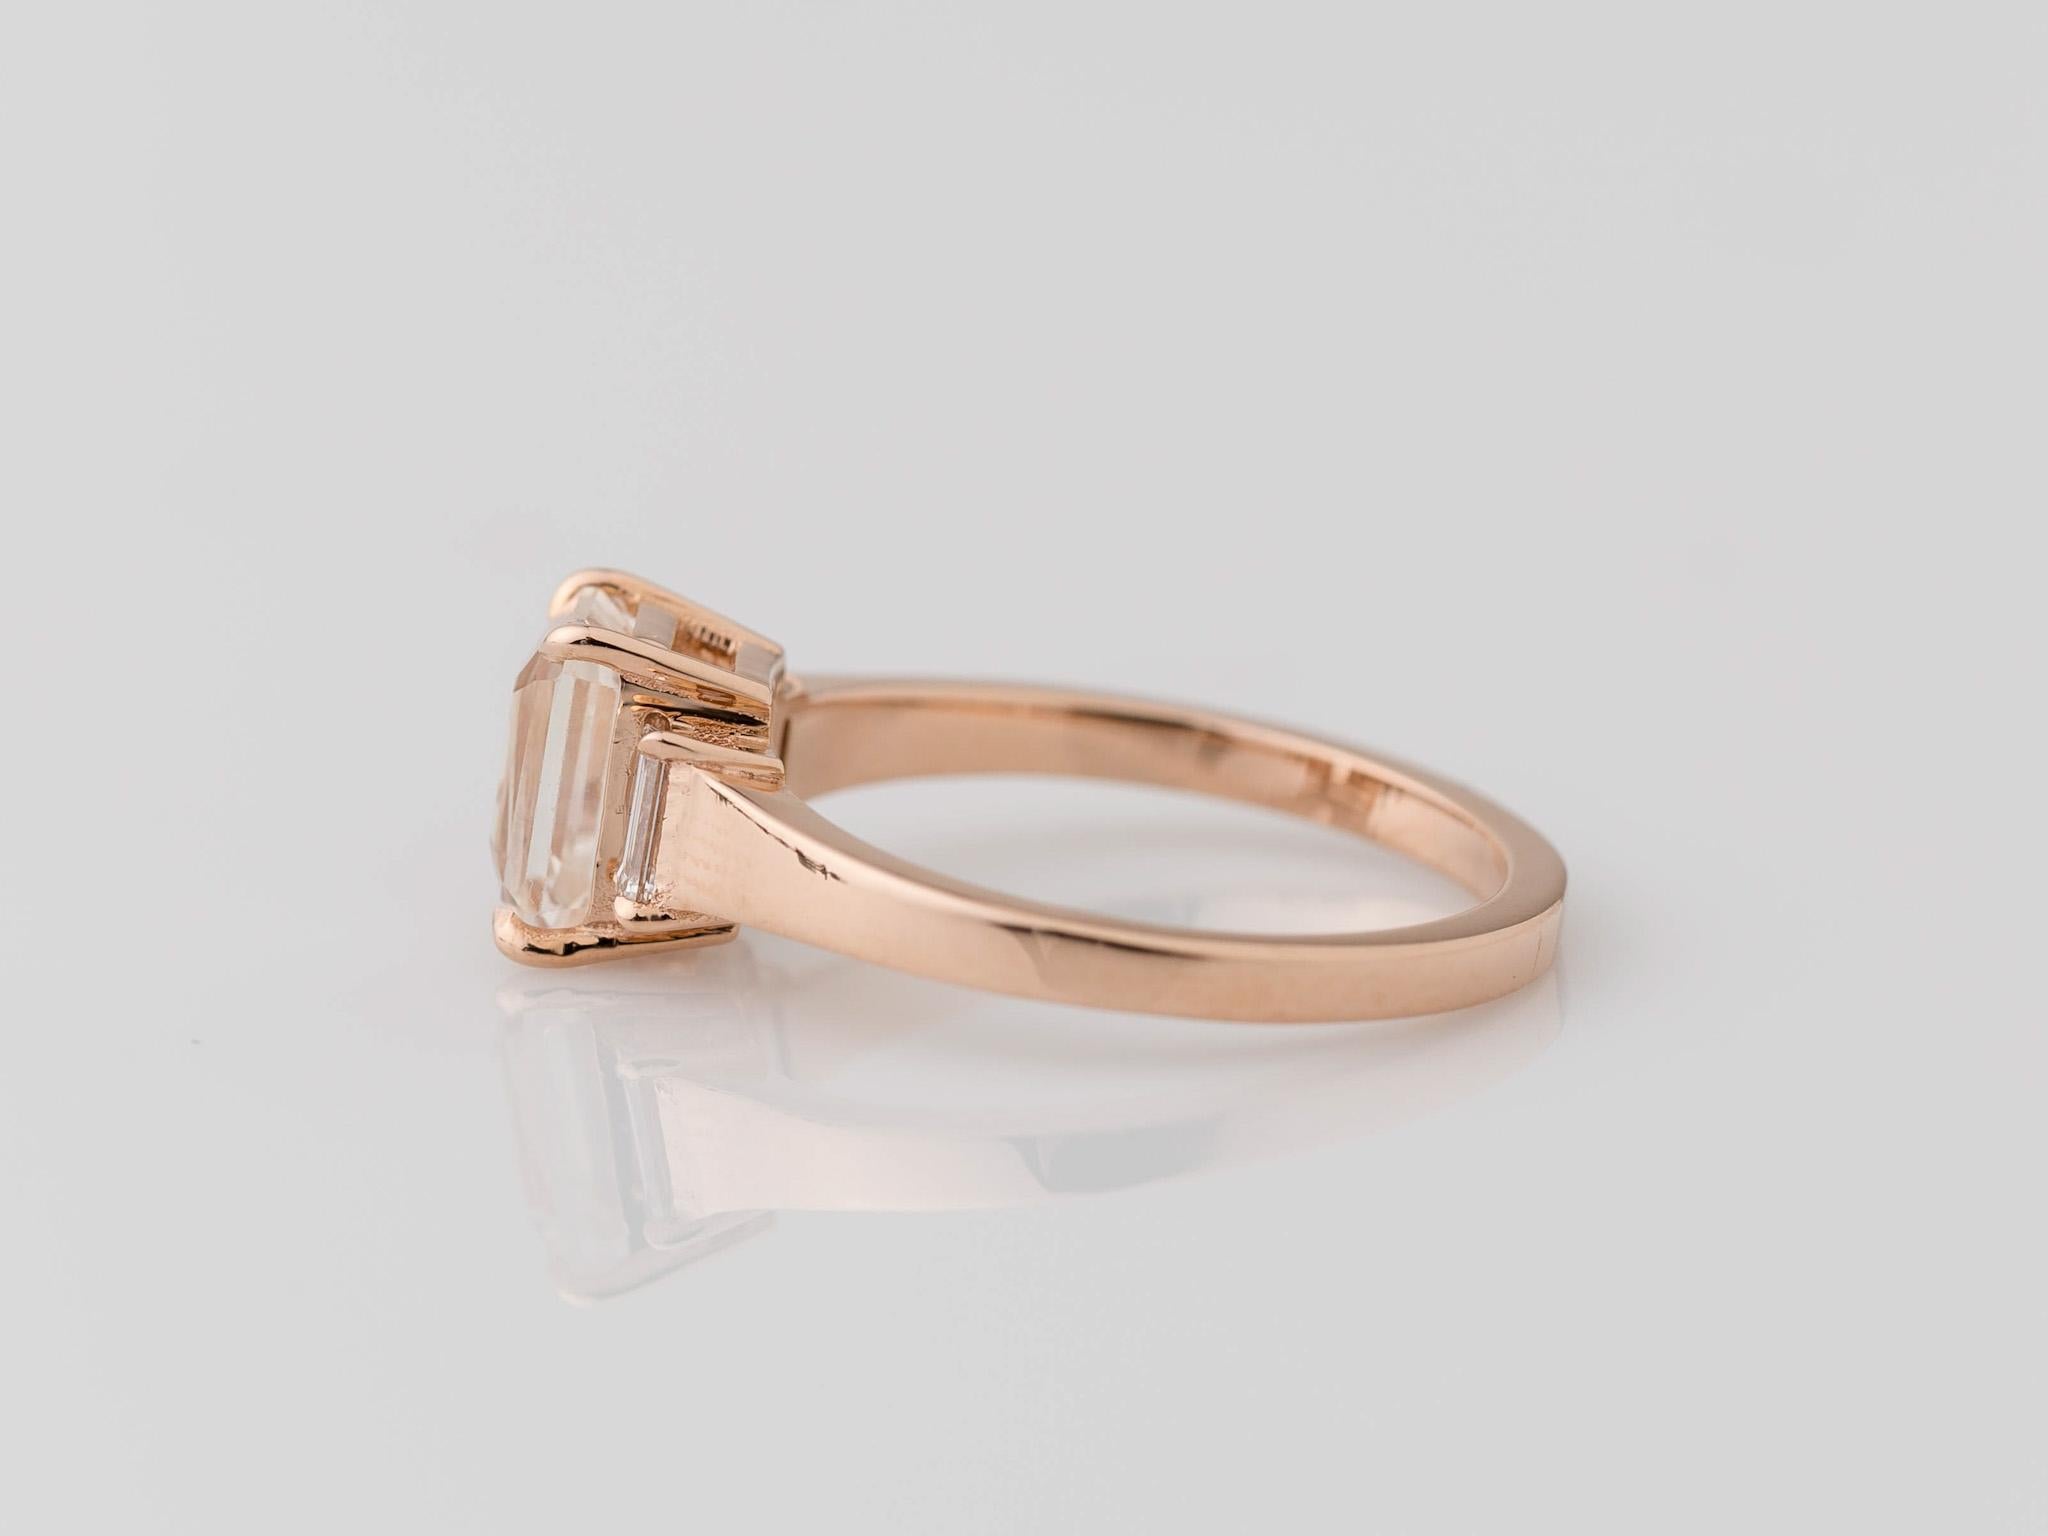 Indulge in understated sophistication with our GIA-certified 1.72 carat Emerald Cut Unheated White Sapphire Ring in 14K Rose Gold. The centerpiece, a pristine white sapphire measuring 7.28x5.24x4.28mm, exudes natural elegance with its non-heated,